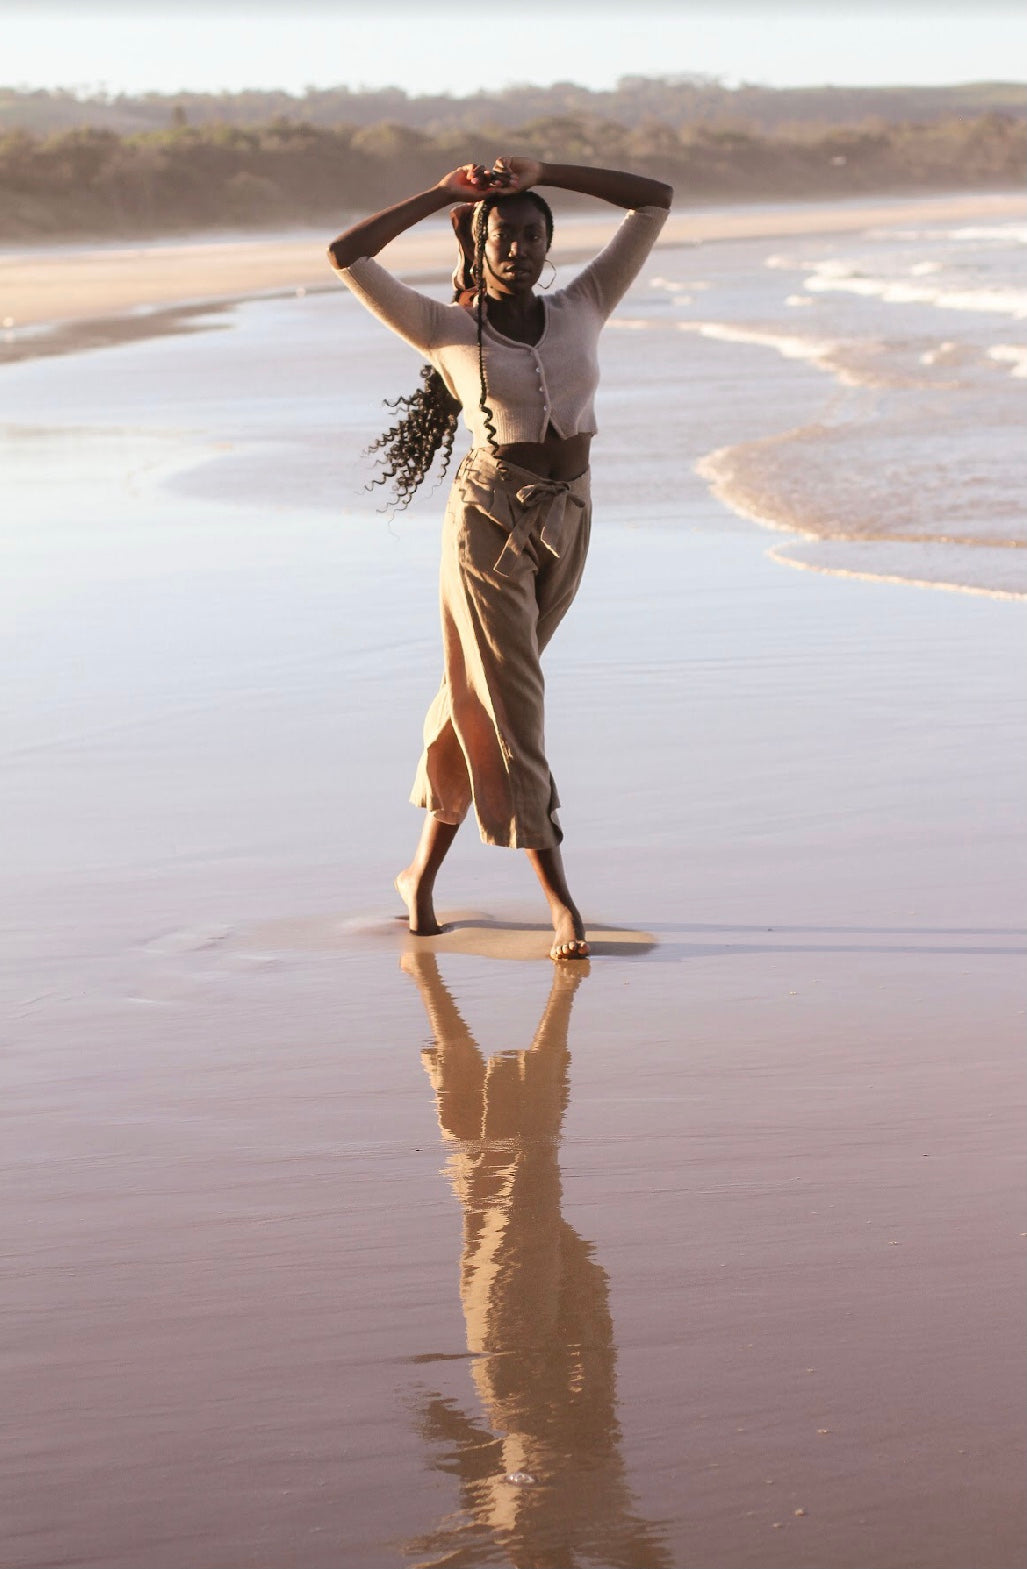 Lilly Pilly Jade Cashmere Cardigan in Oatmeal worn by woman on Byron Bay beach